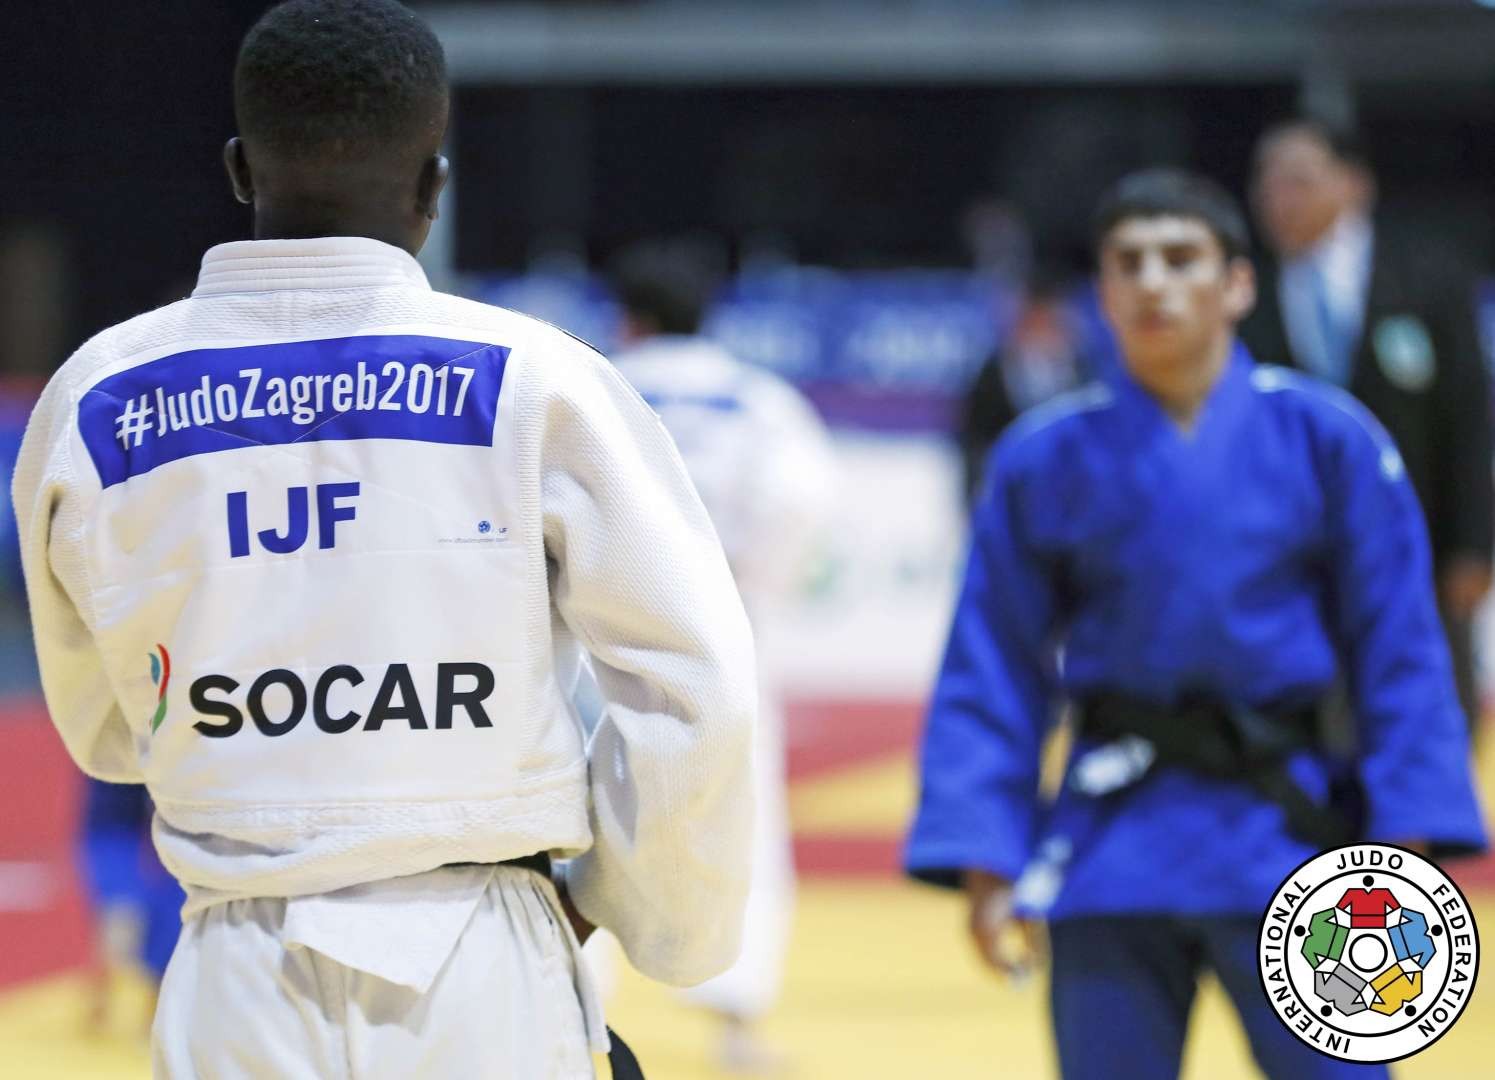 IJF among the top Olympic sports on social media / IJF